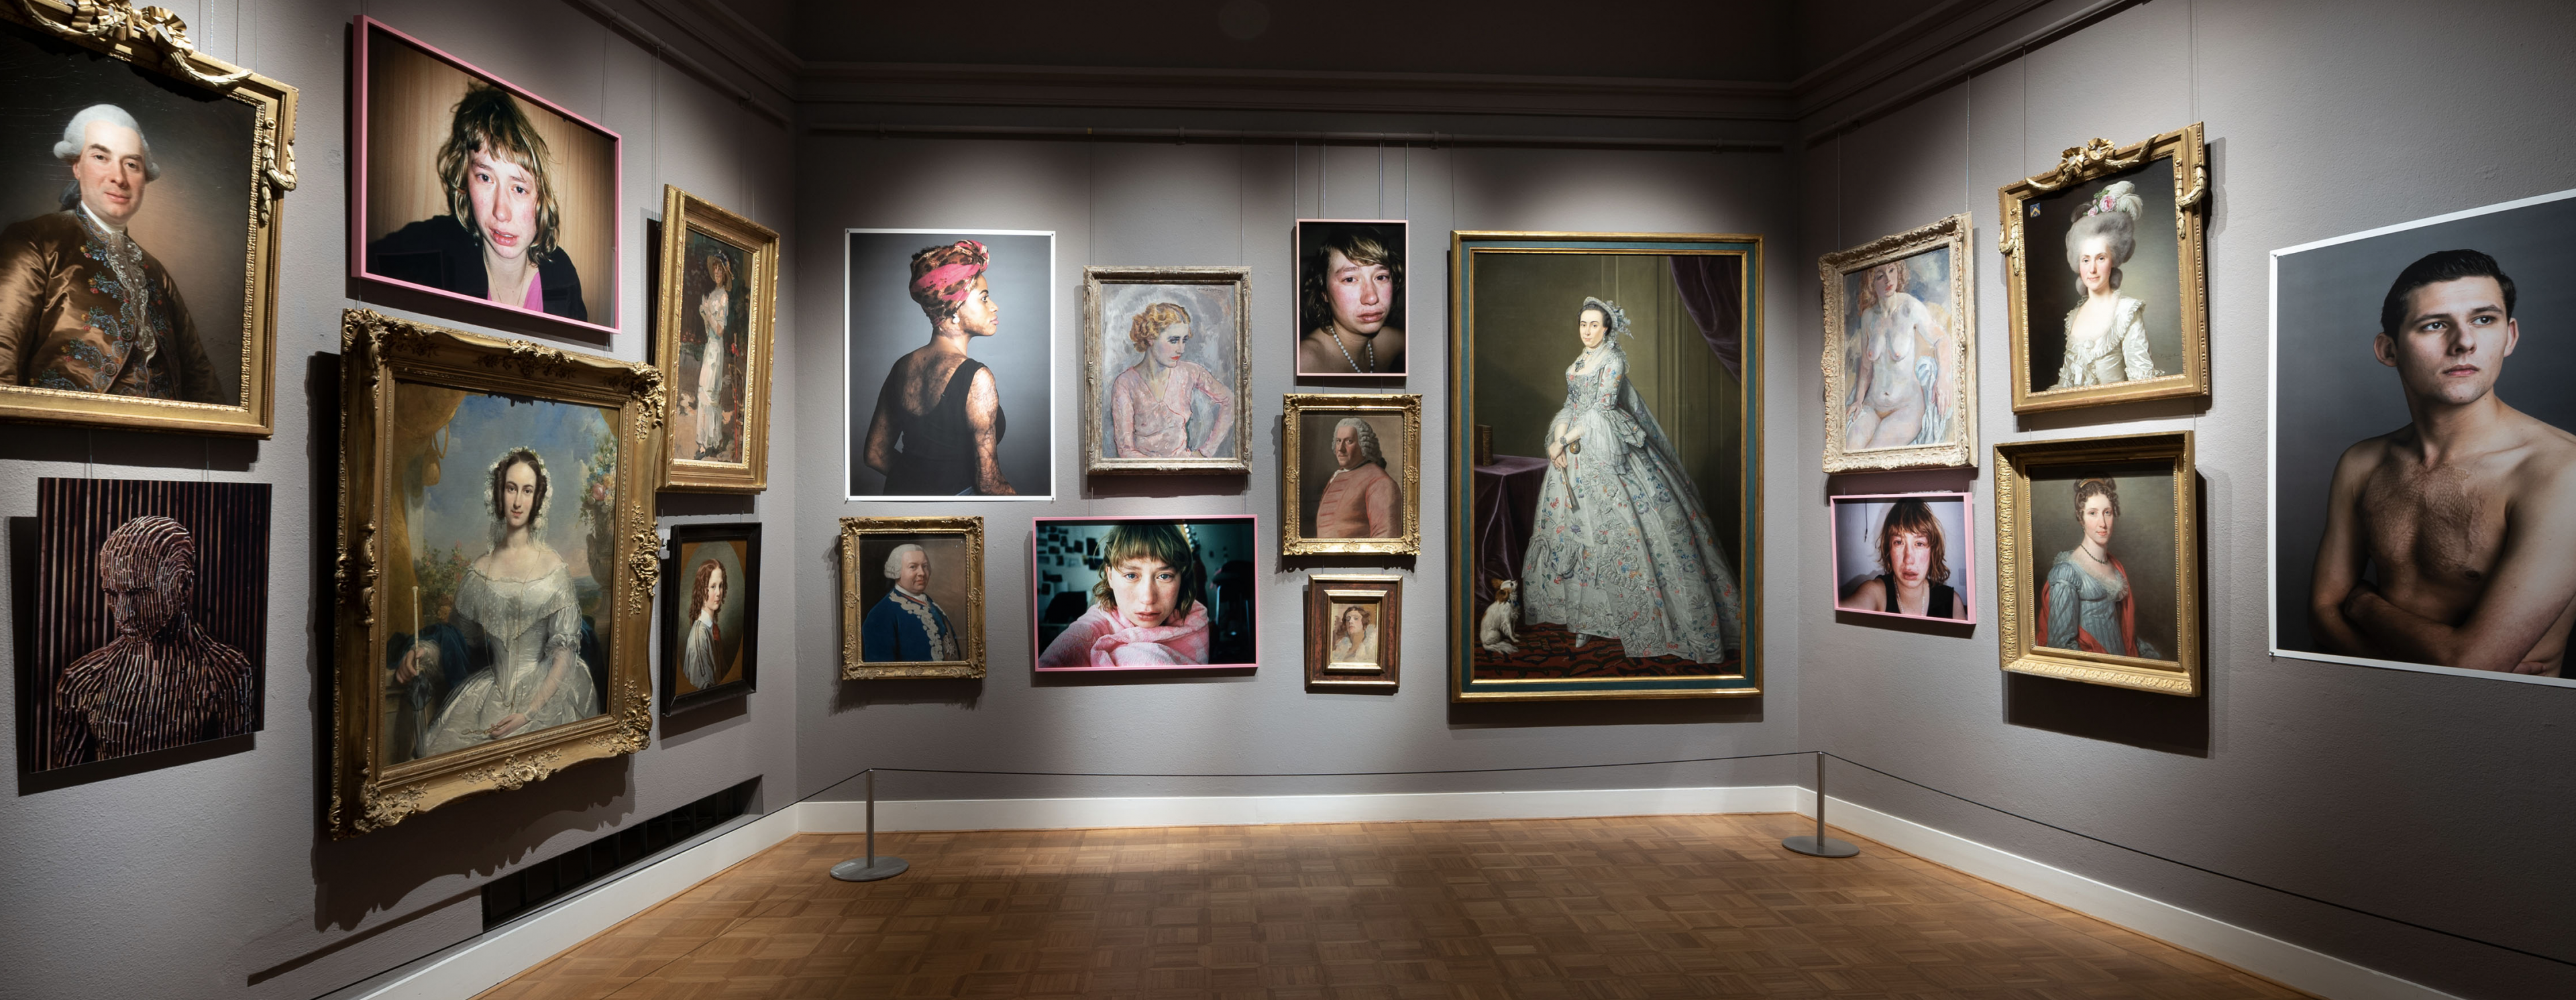 A good example of an art collection of contemporary and classical 'portraits' in the Rijksmuseum van Twente